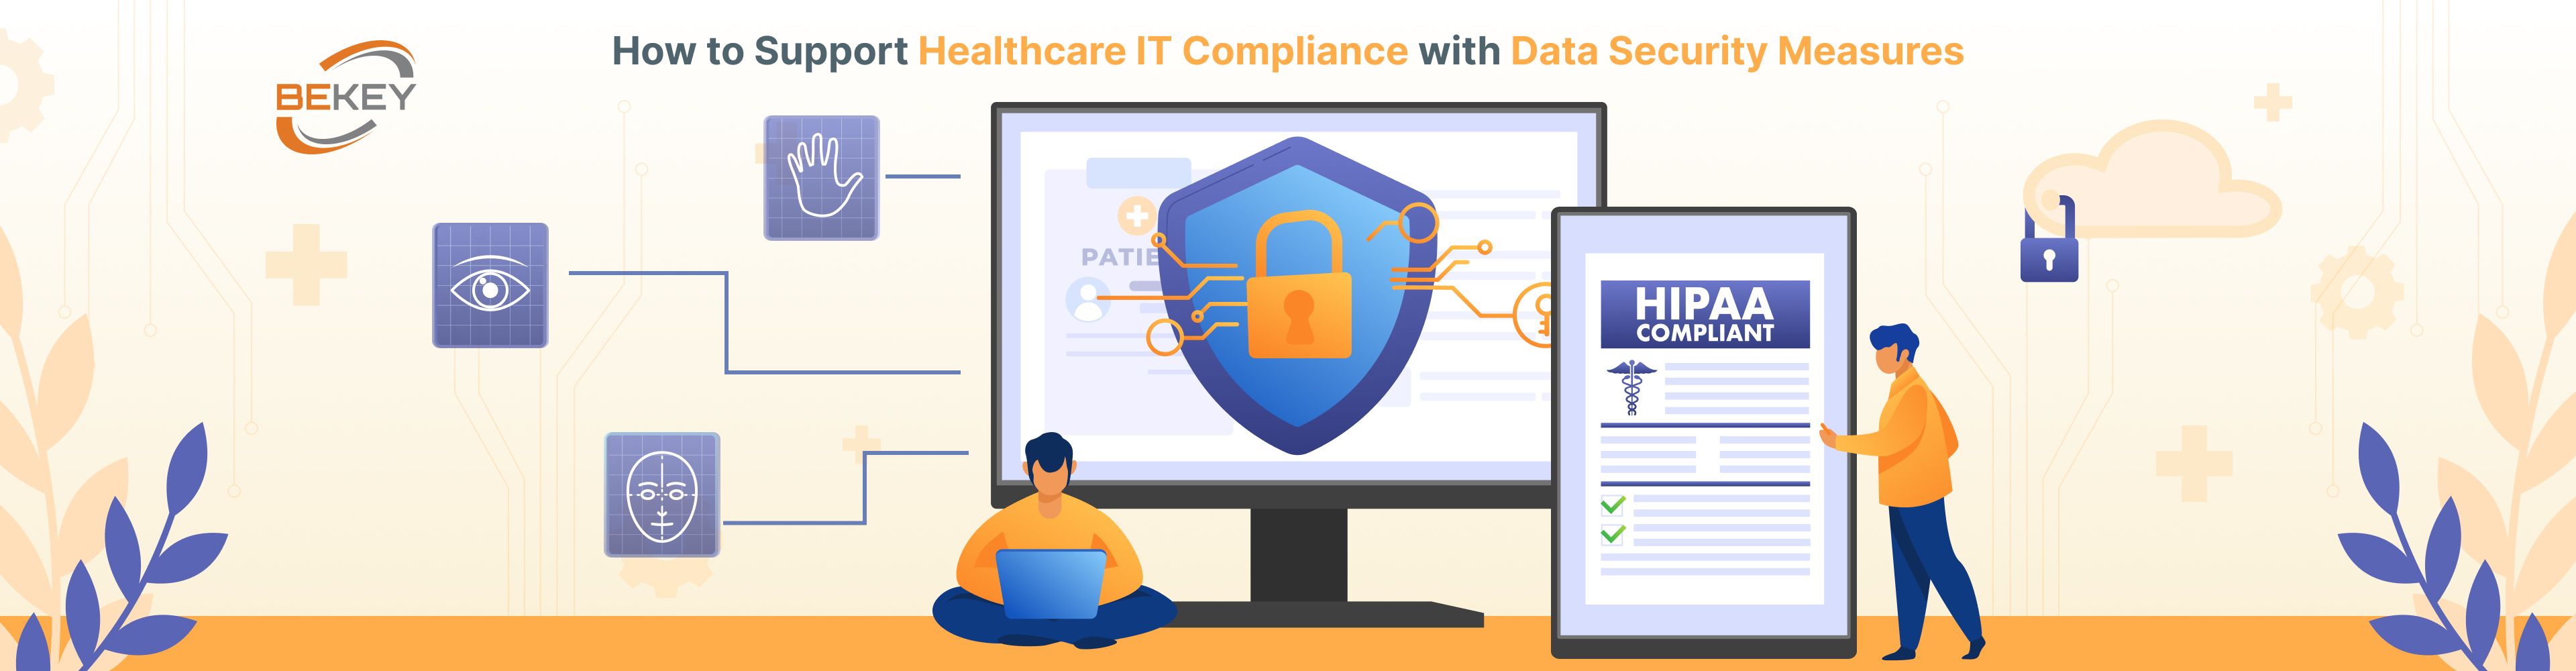 How to Support Healthcare IT Compliance with Data Security Measures - image 